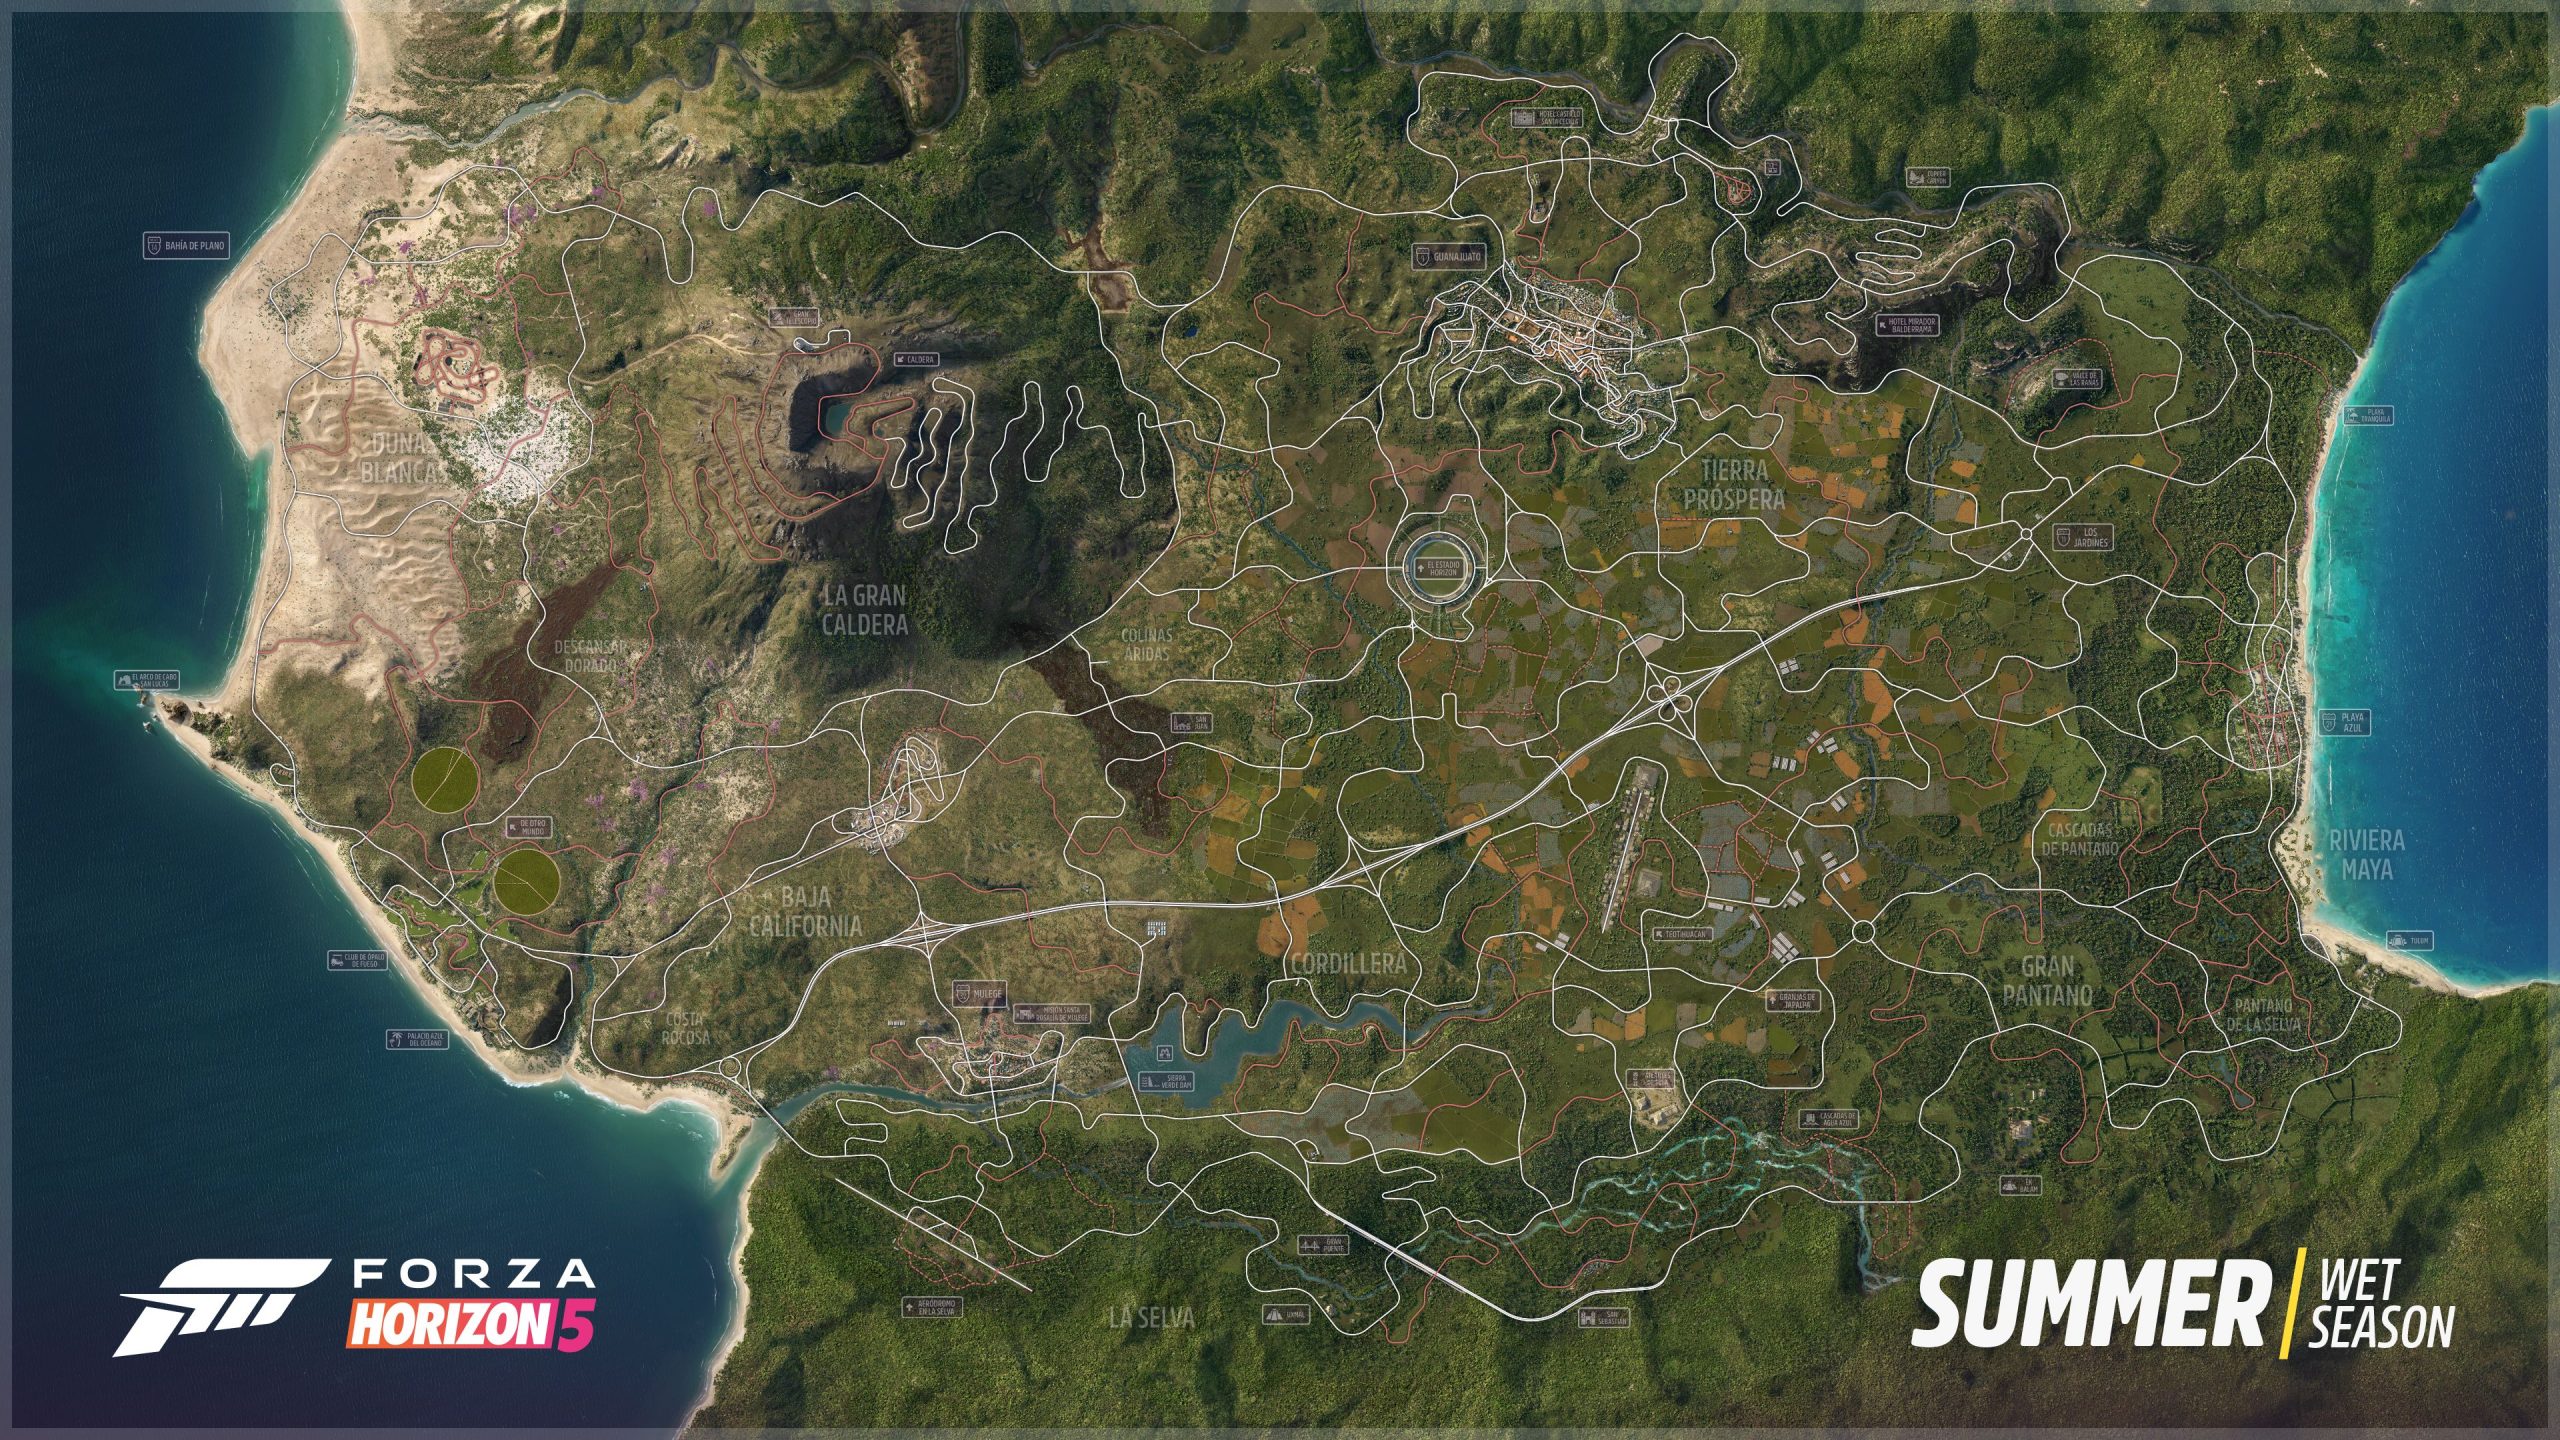 This is the complete open world map from racing game Forza Horizon 5